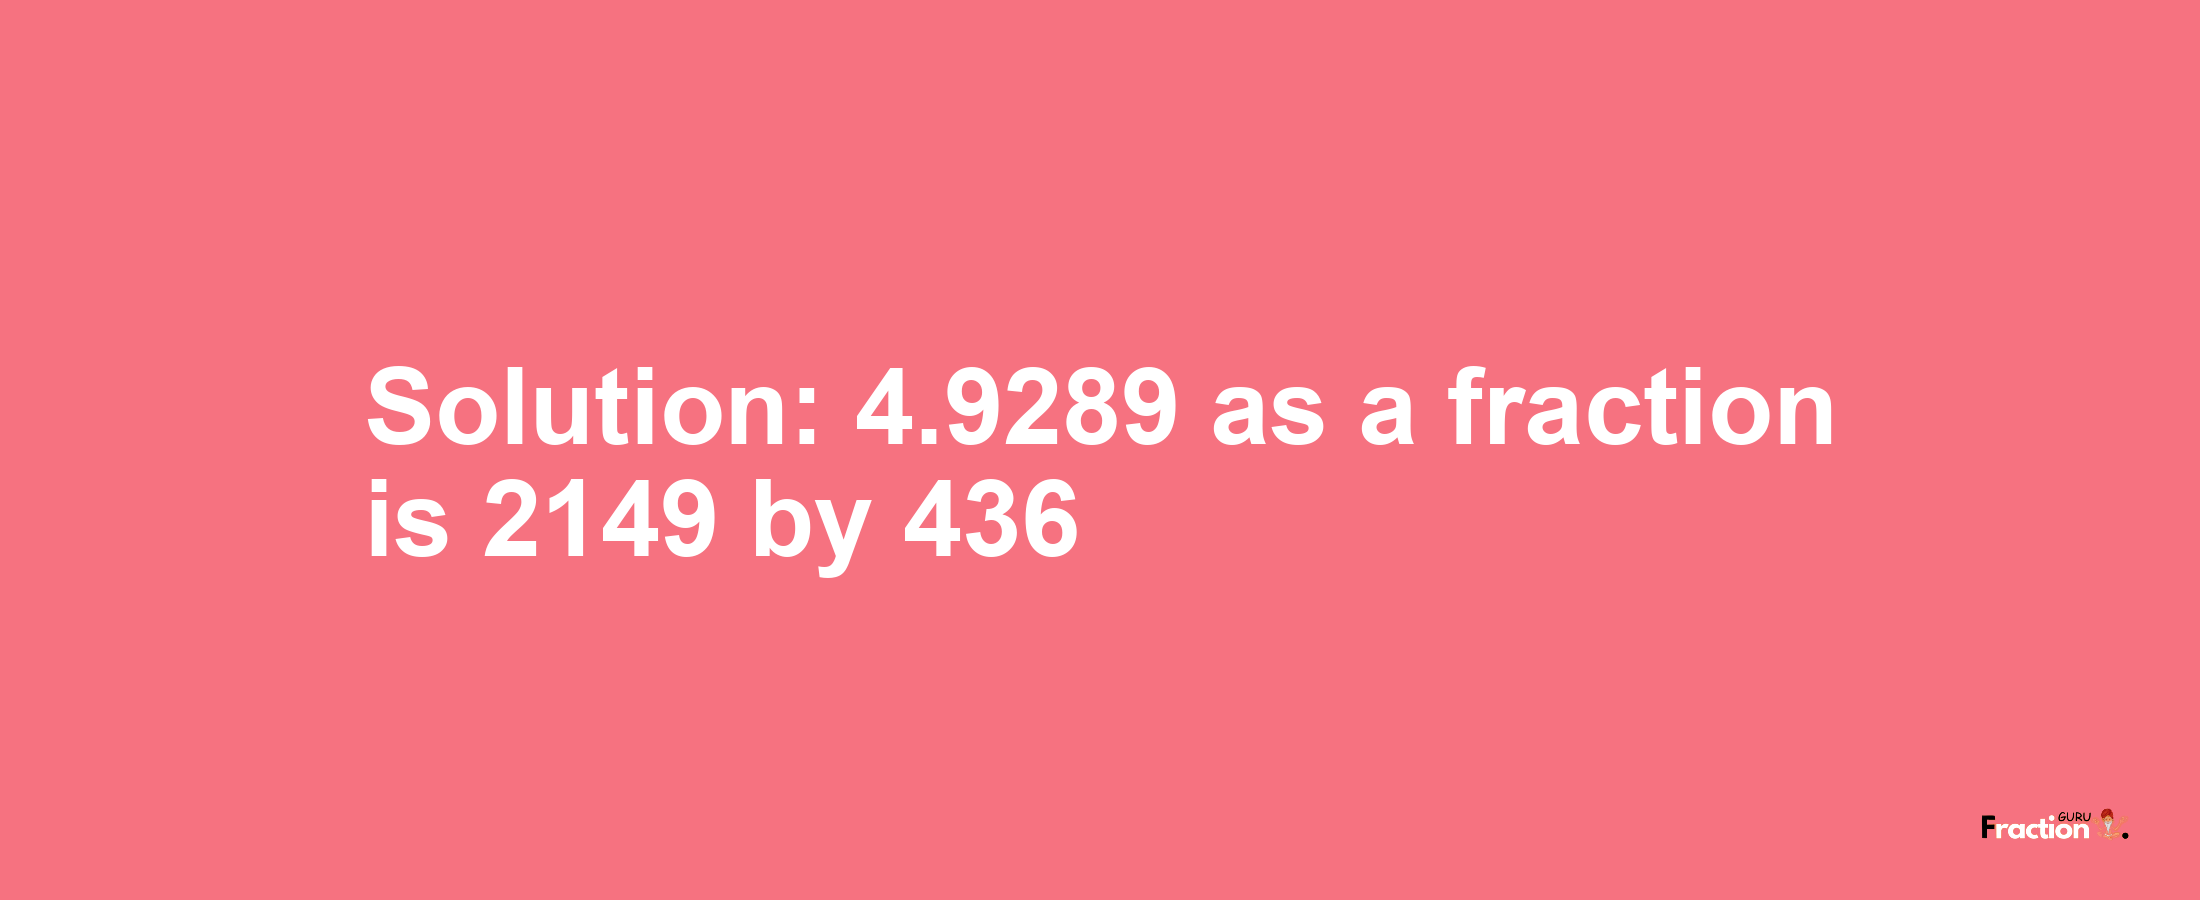 Solution:4.9289 as a fraction is 2149/436